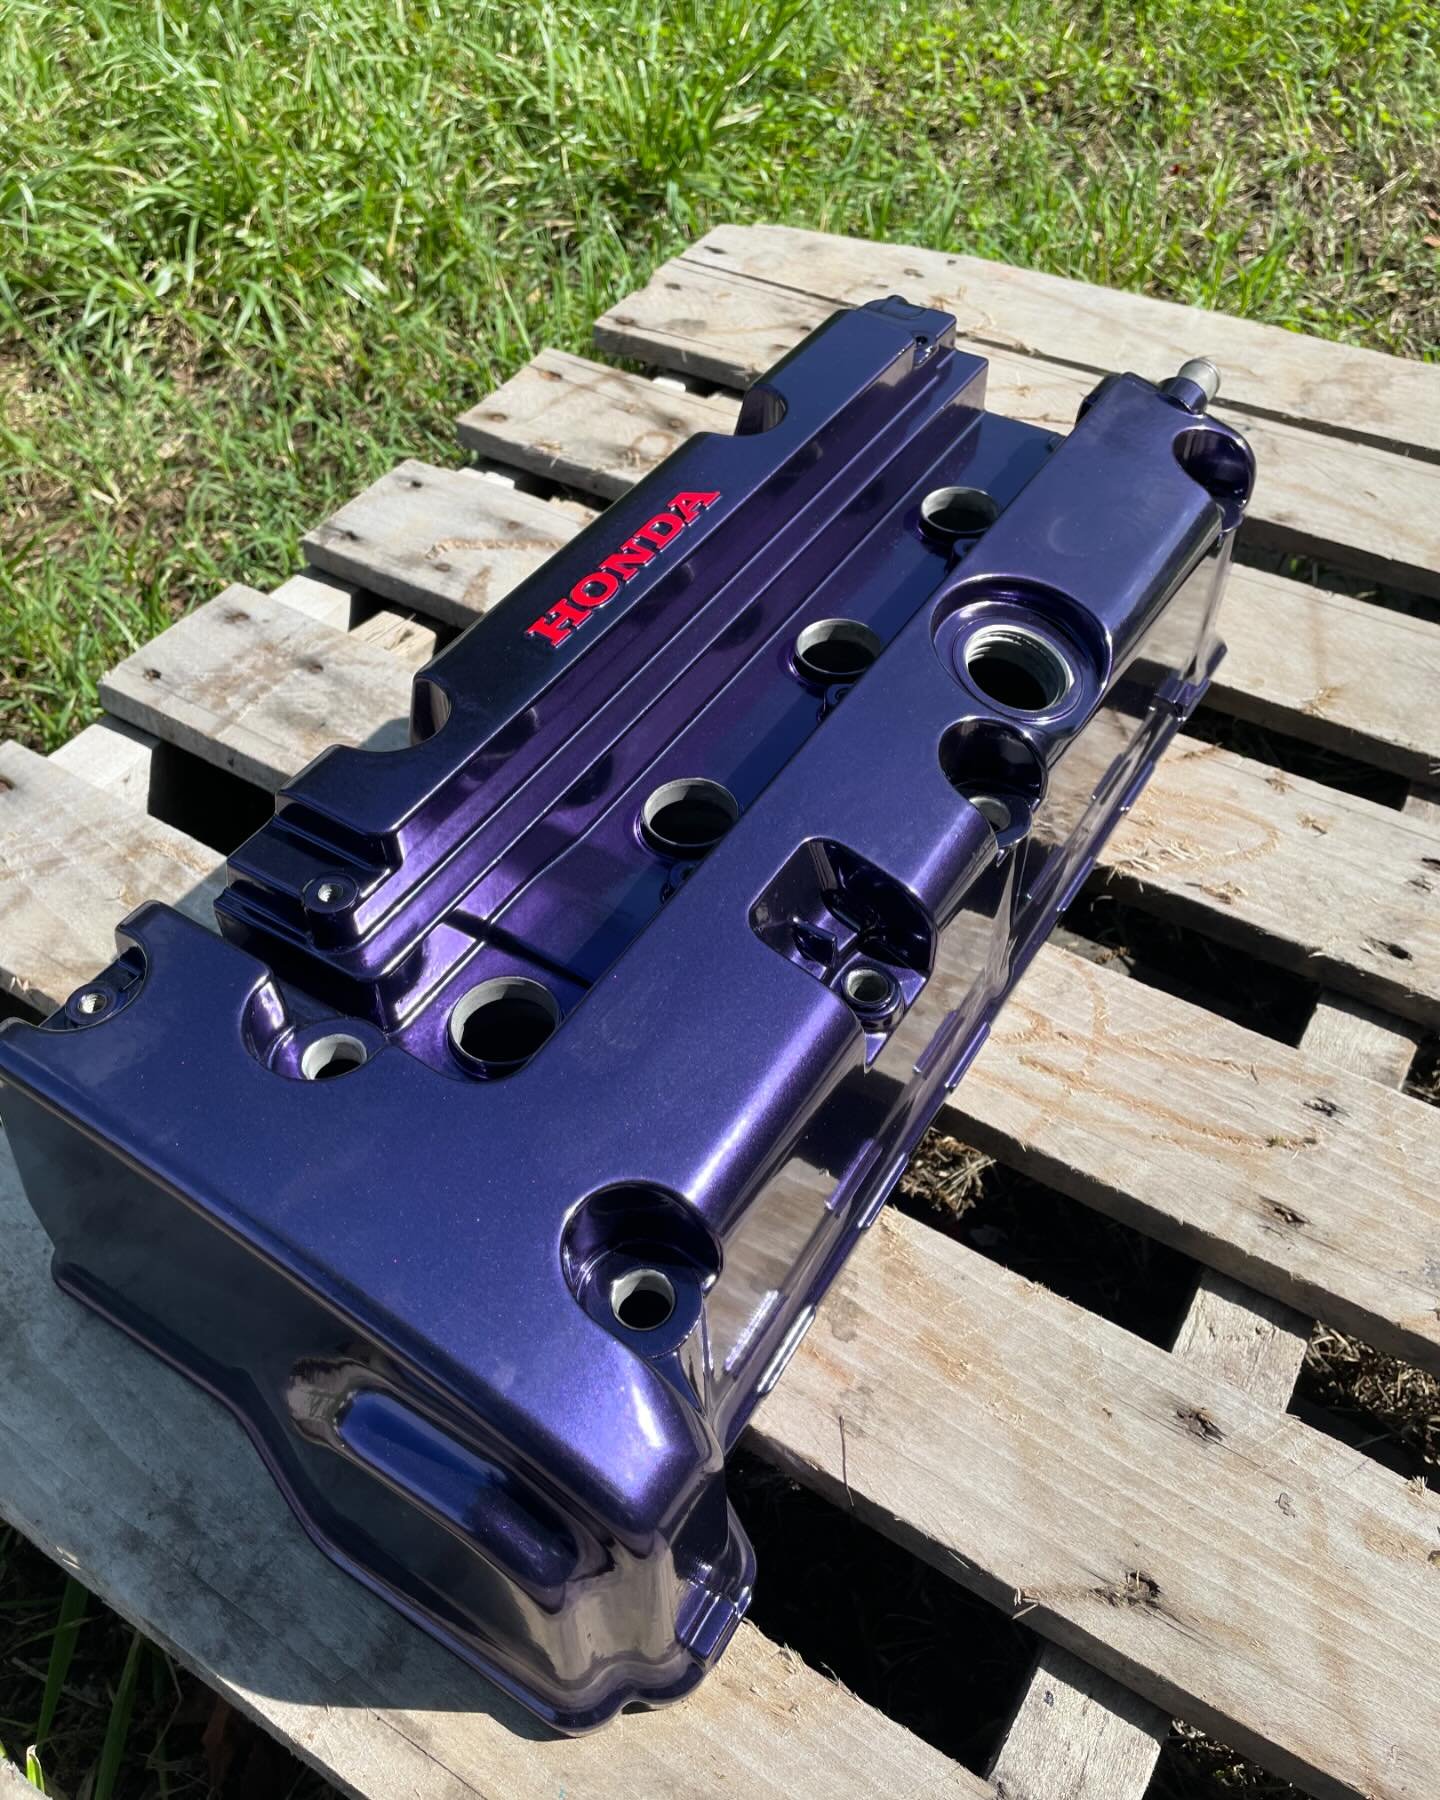 Some parts come in the shop in pretty rough shape. We do our best to bring them back to life! 2 tone extreme purple and super mirror red on the valve cover, extreme purple on the rest of it! 
The camera struggles to capture this color!
.
.
.
.
#powde